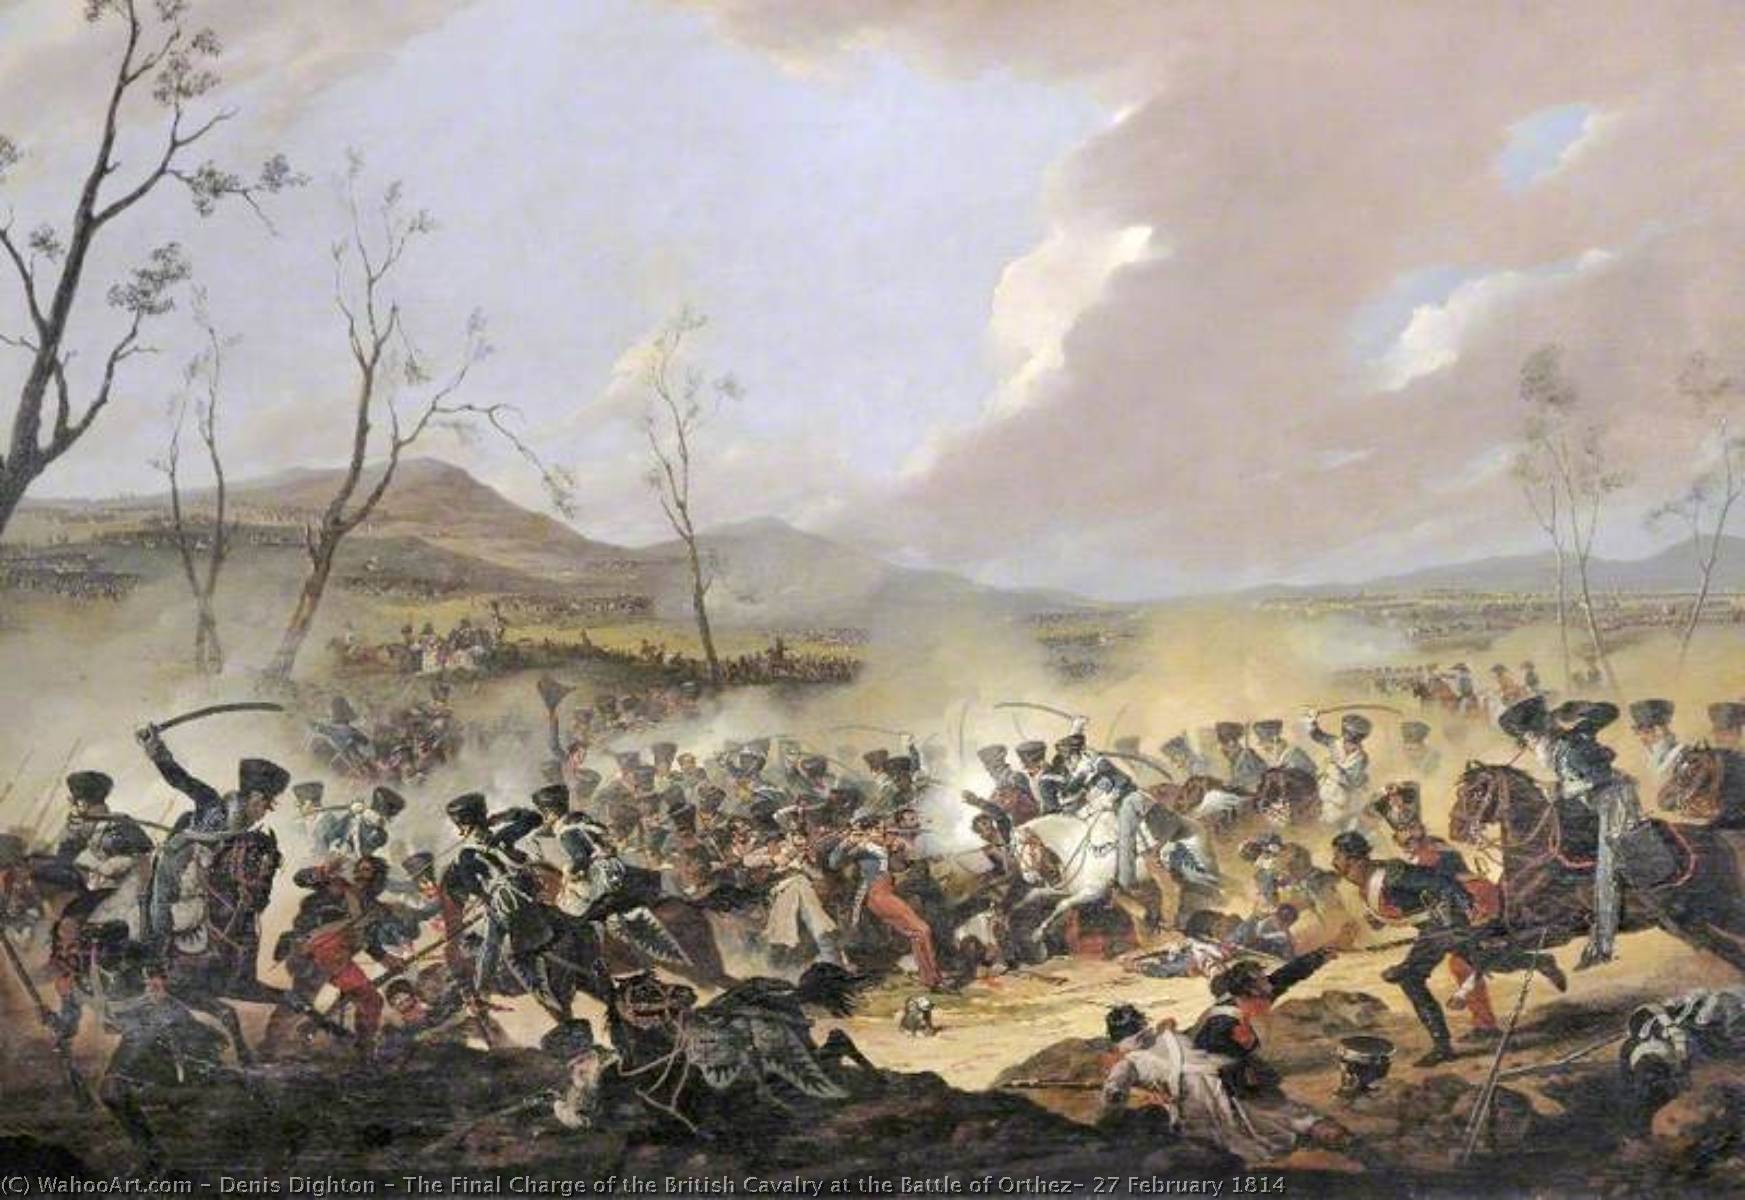 WikiOO.org - Encyclopedia of Fine Arts - Lukisan, Artwork Denis Dighton - The Final Charge of the British Cavalry at the Battle of Orthez, 27 February 1814